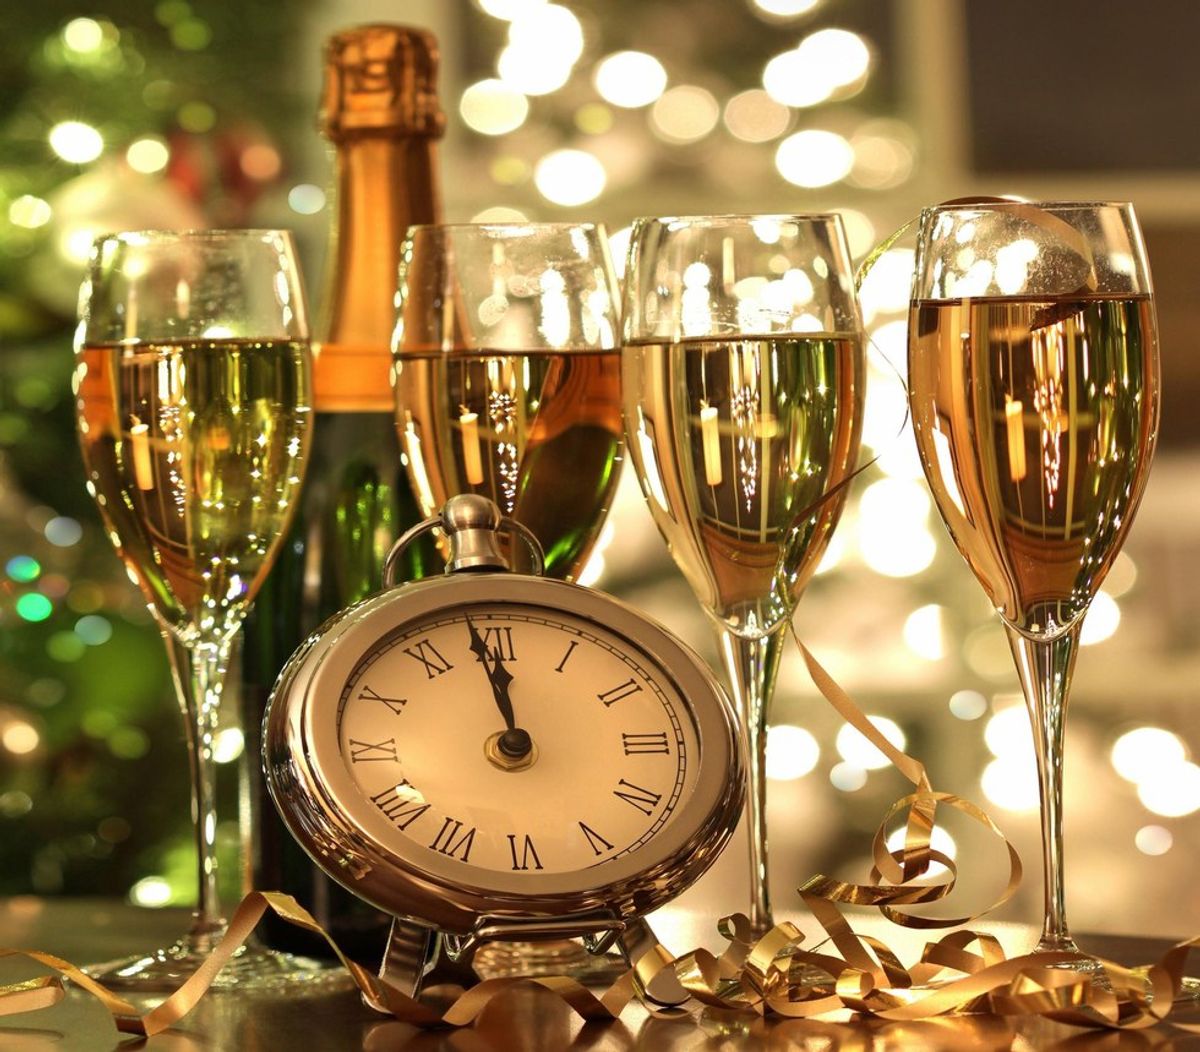 Latino New Year's Eve Traditions You Probably Didn't Know About